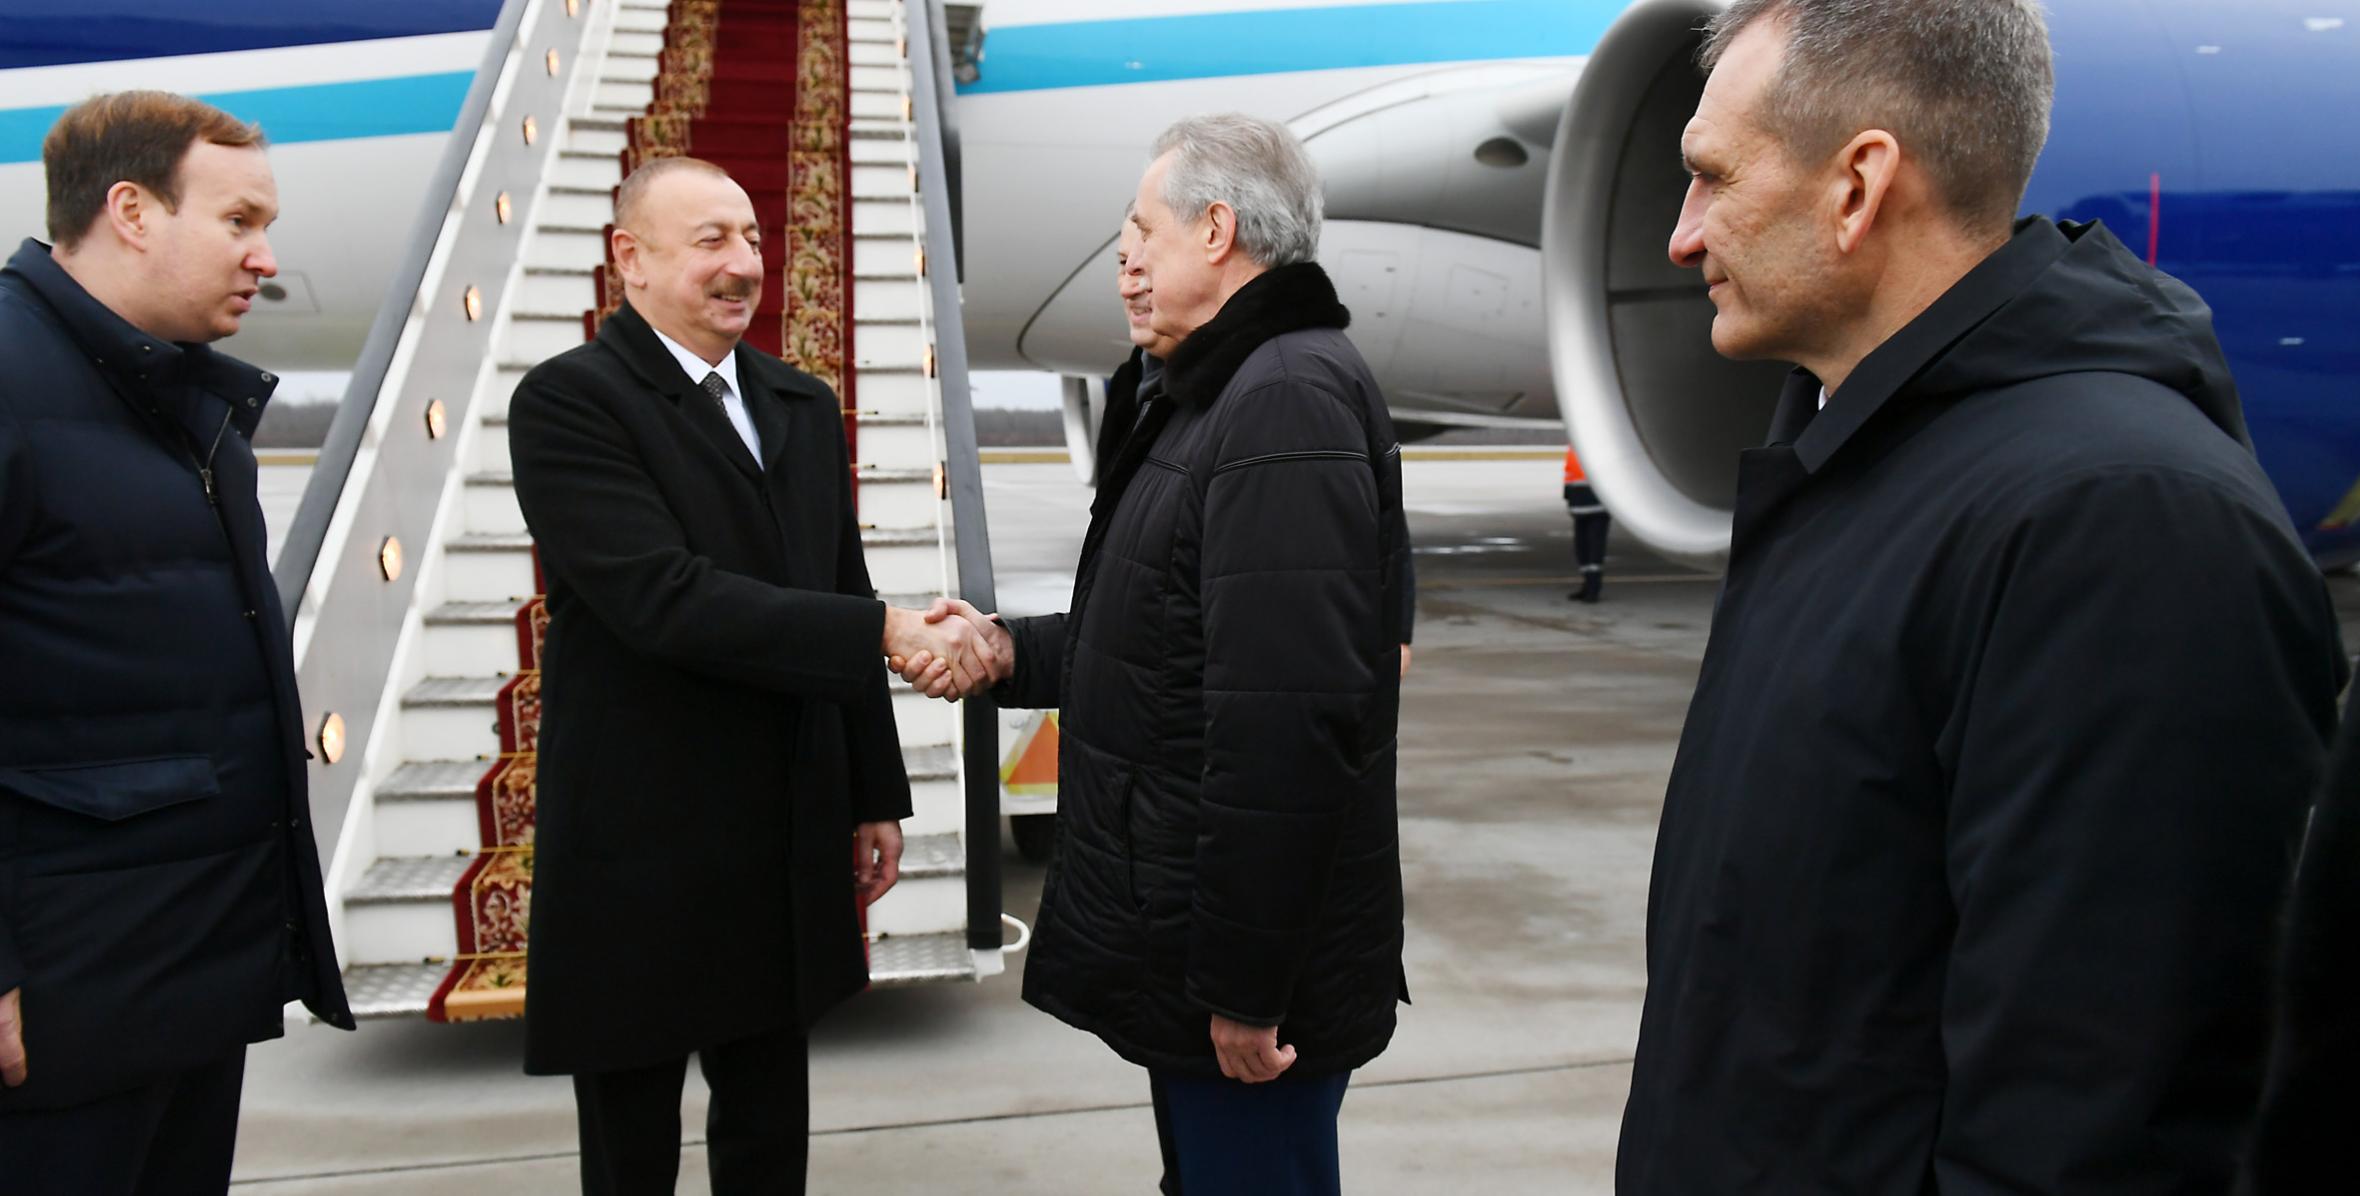 Ilham Aliyev arrived in Russian Federation for visit